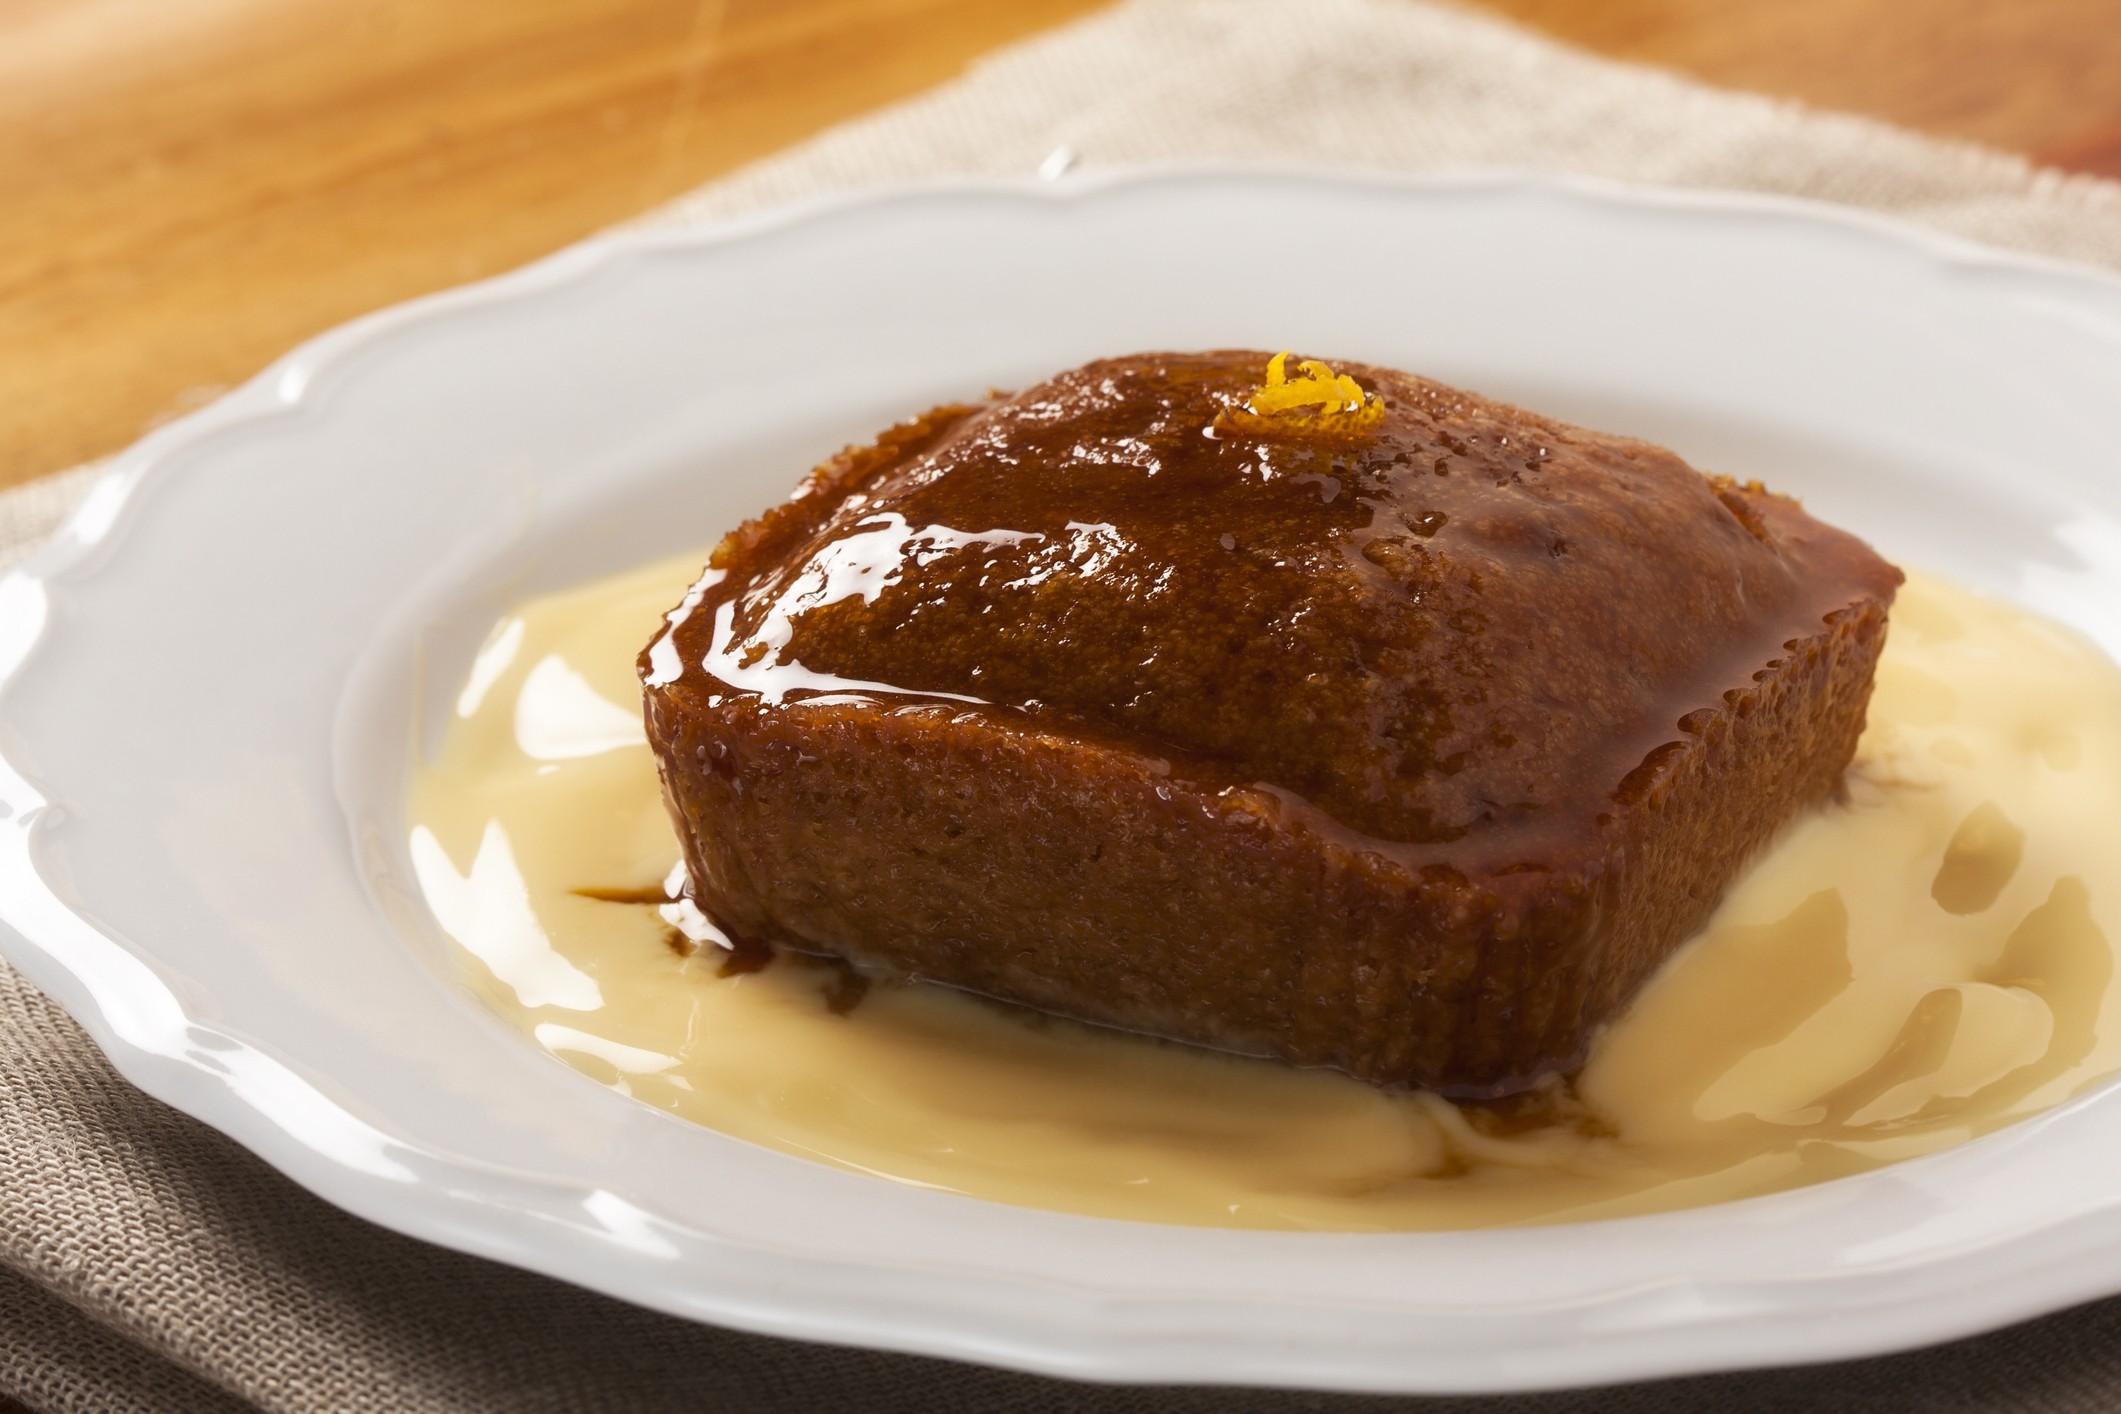 Malva pudding. South African dessert. Spongy cake with a caramelized butter sauce. (Foto: Getty Images)